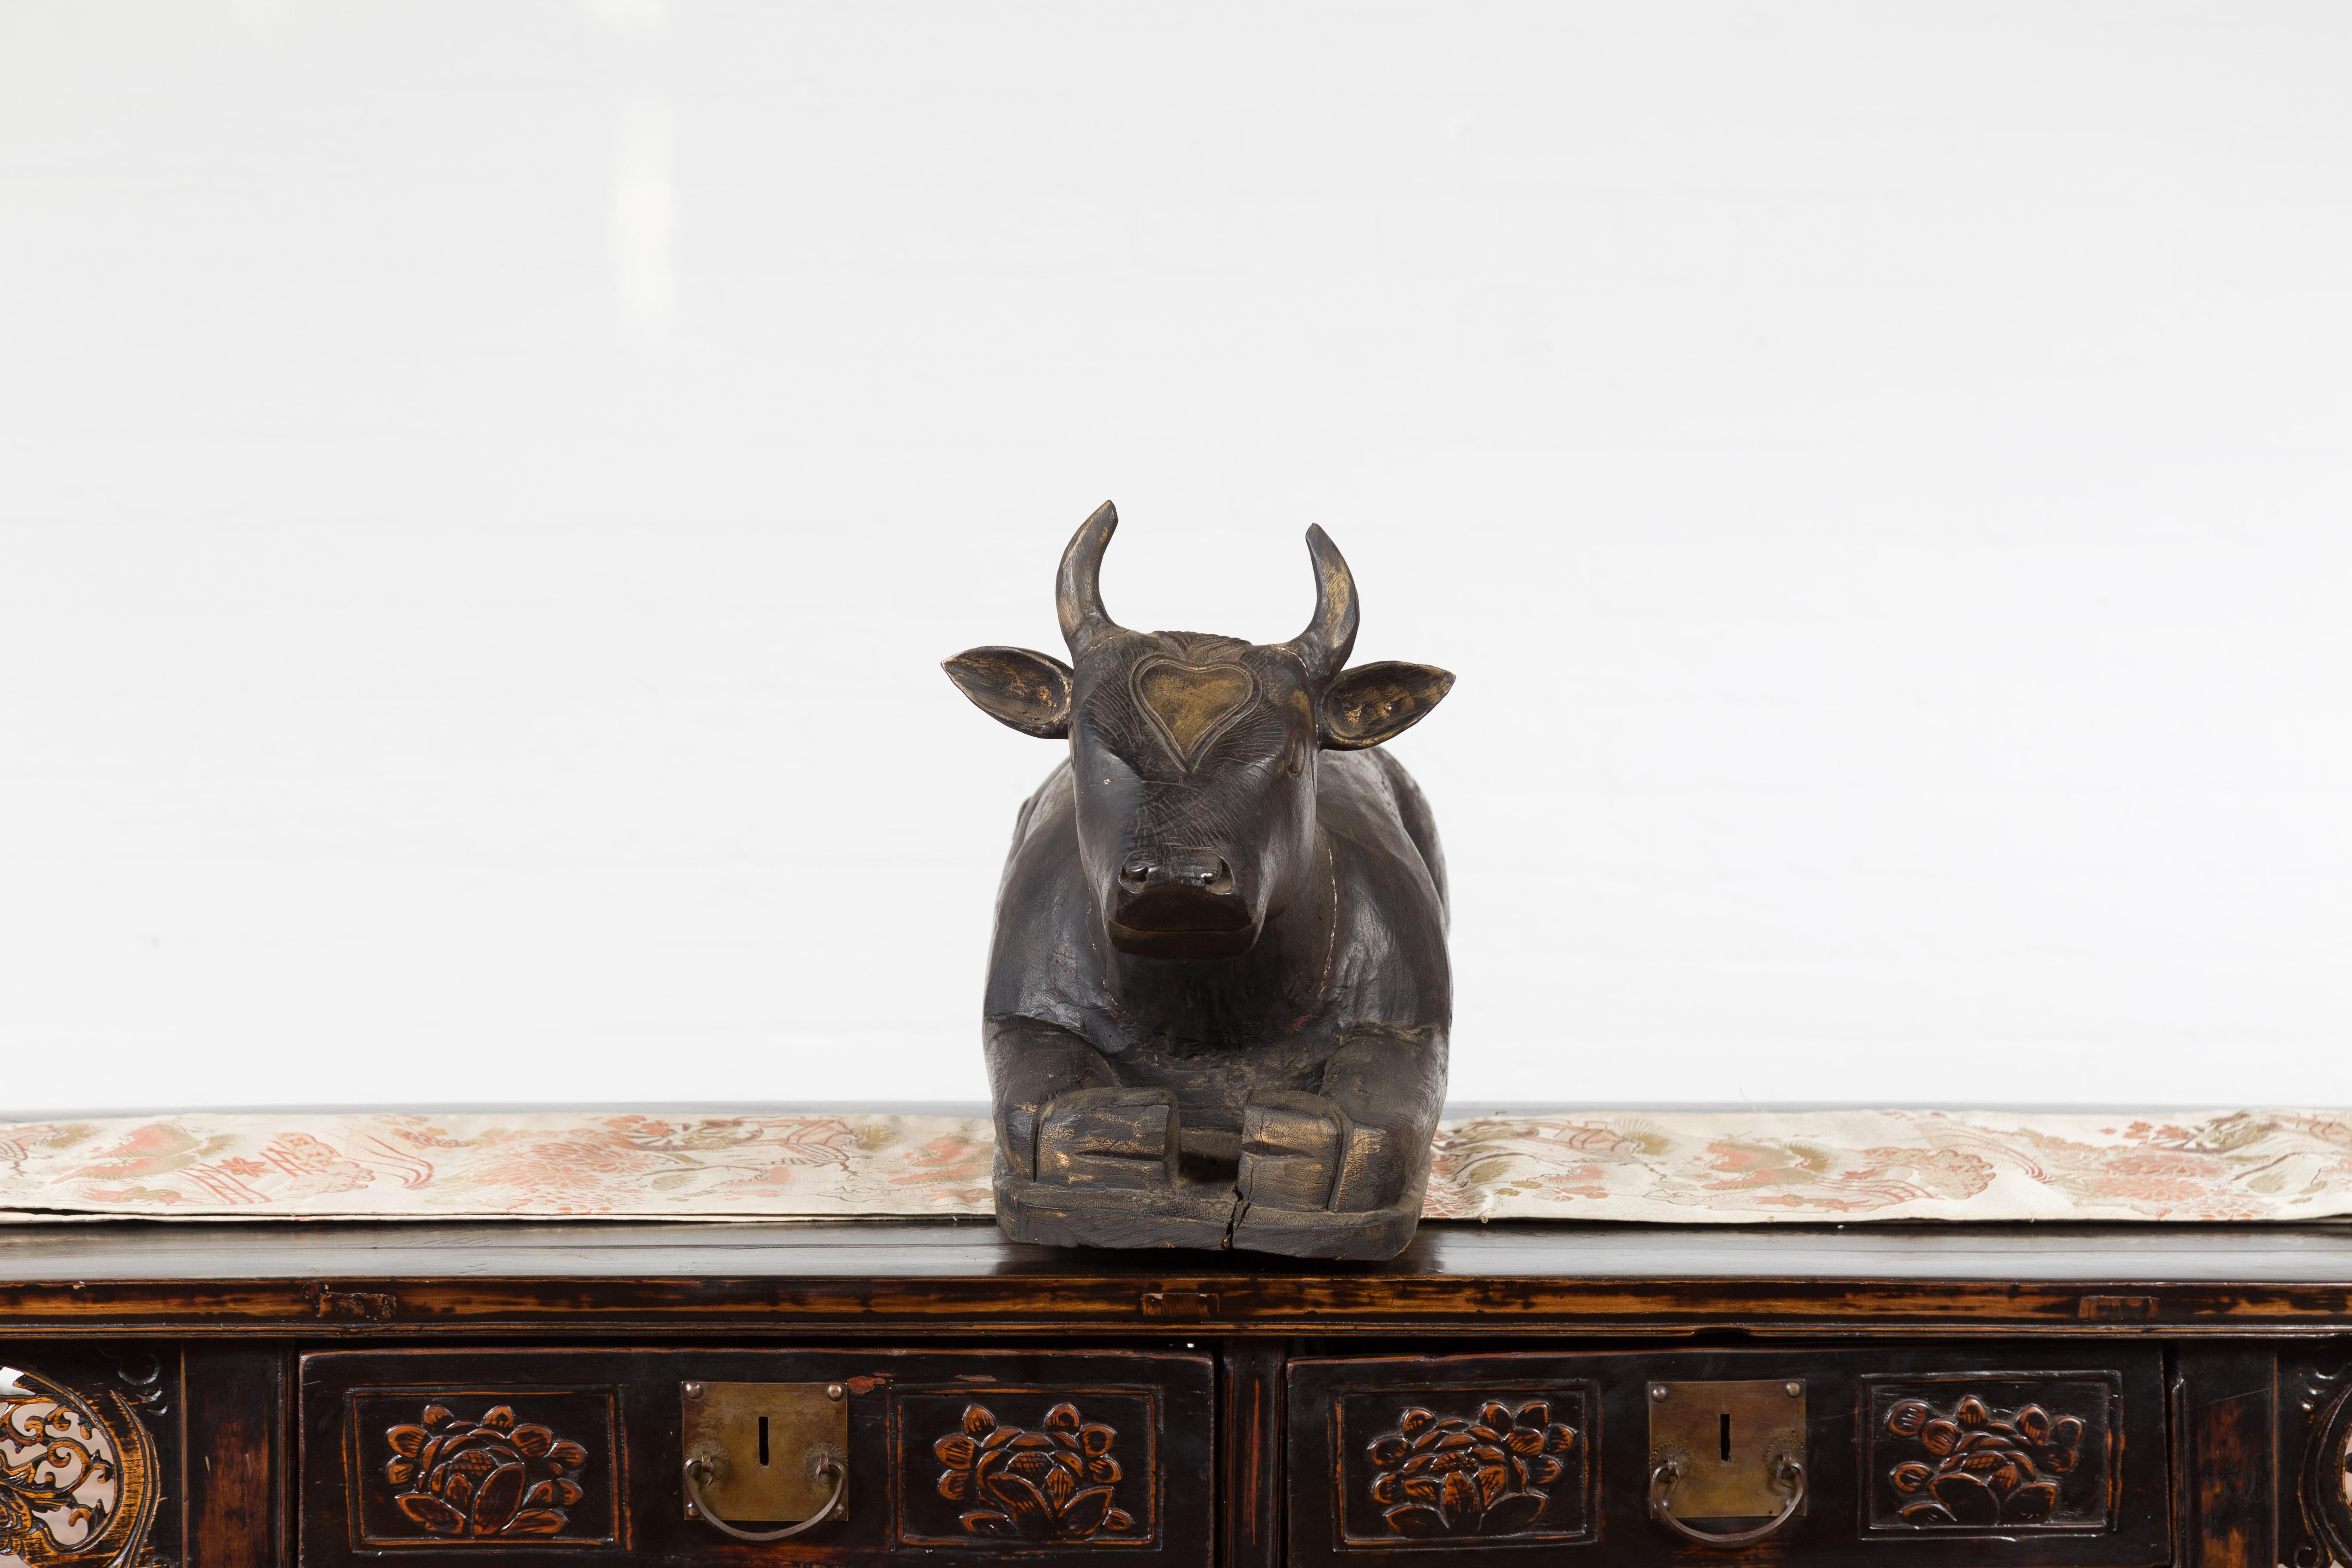 20th Century Indian Vintage Carved Wooden Bull Sculpture Depicting Guardian Deity Nandi For Sale